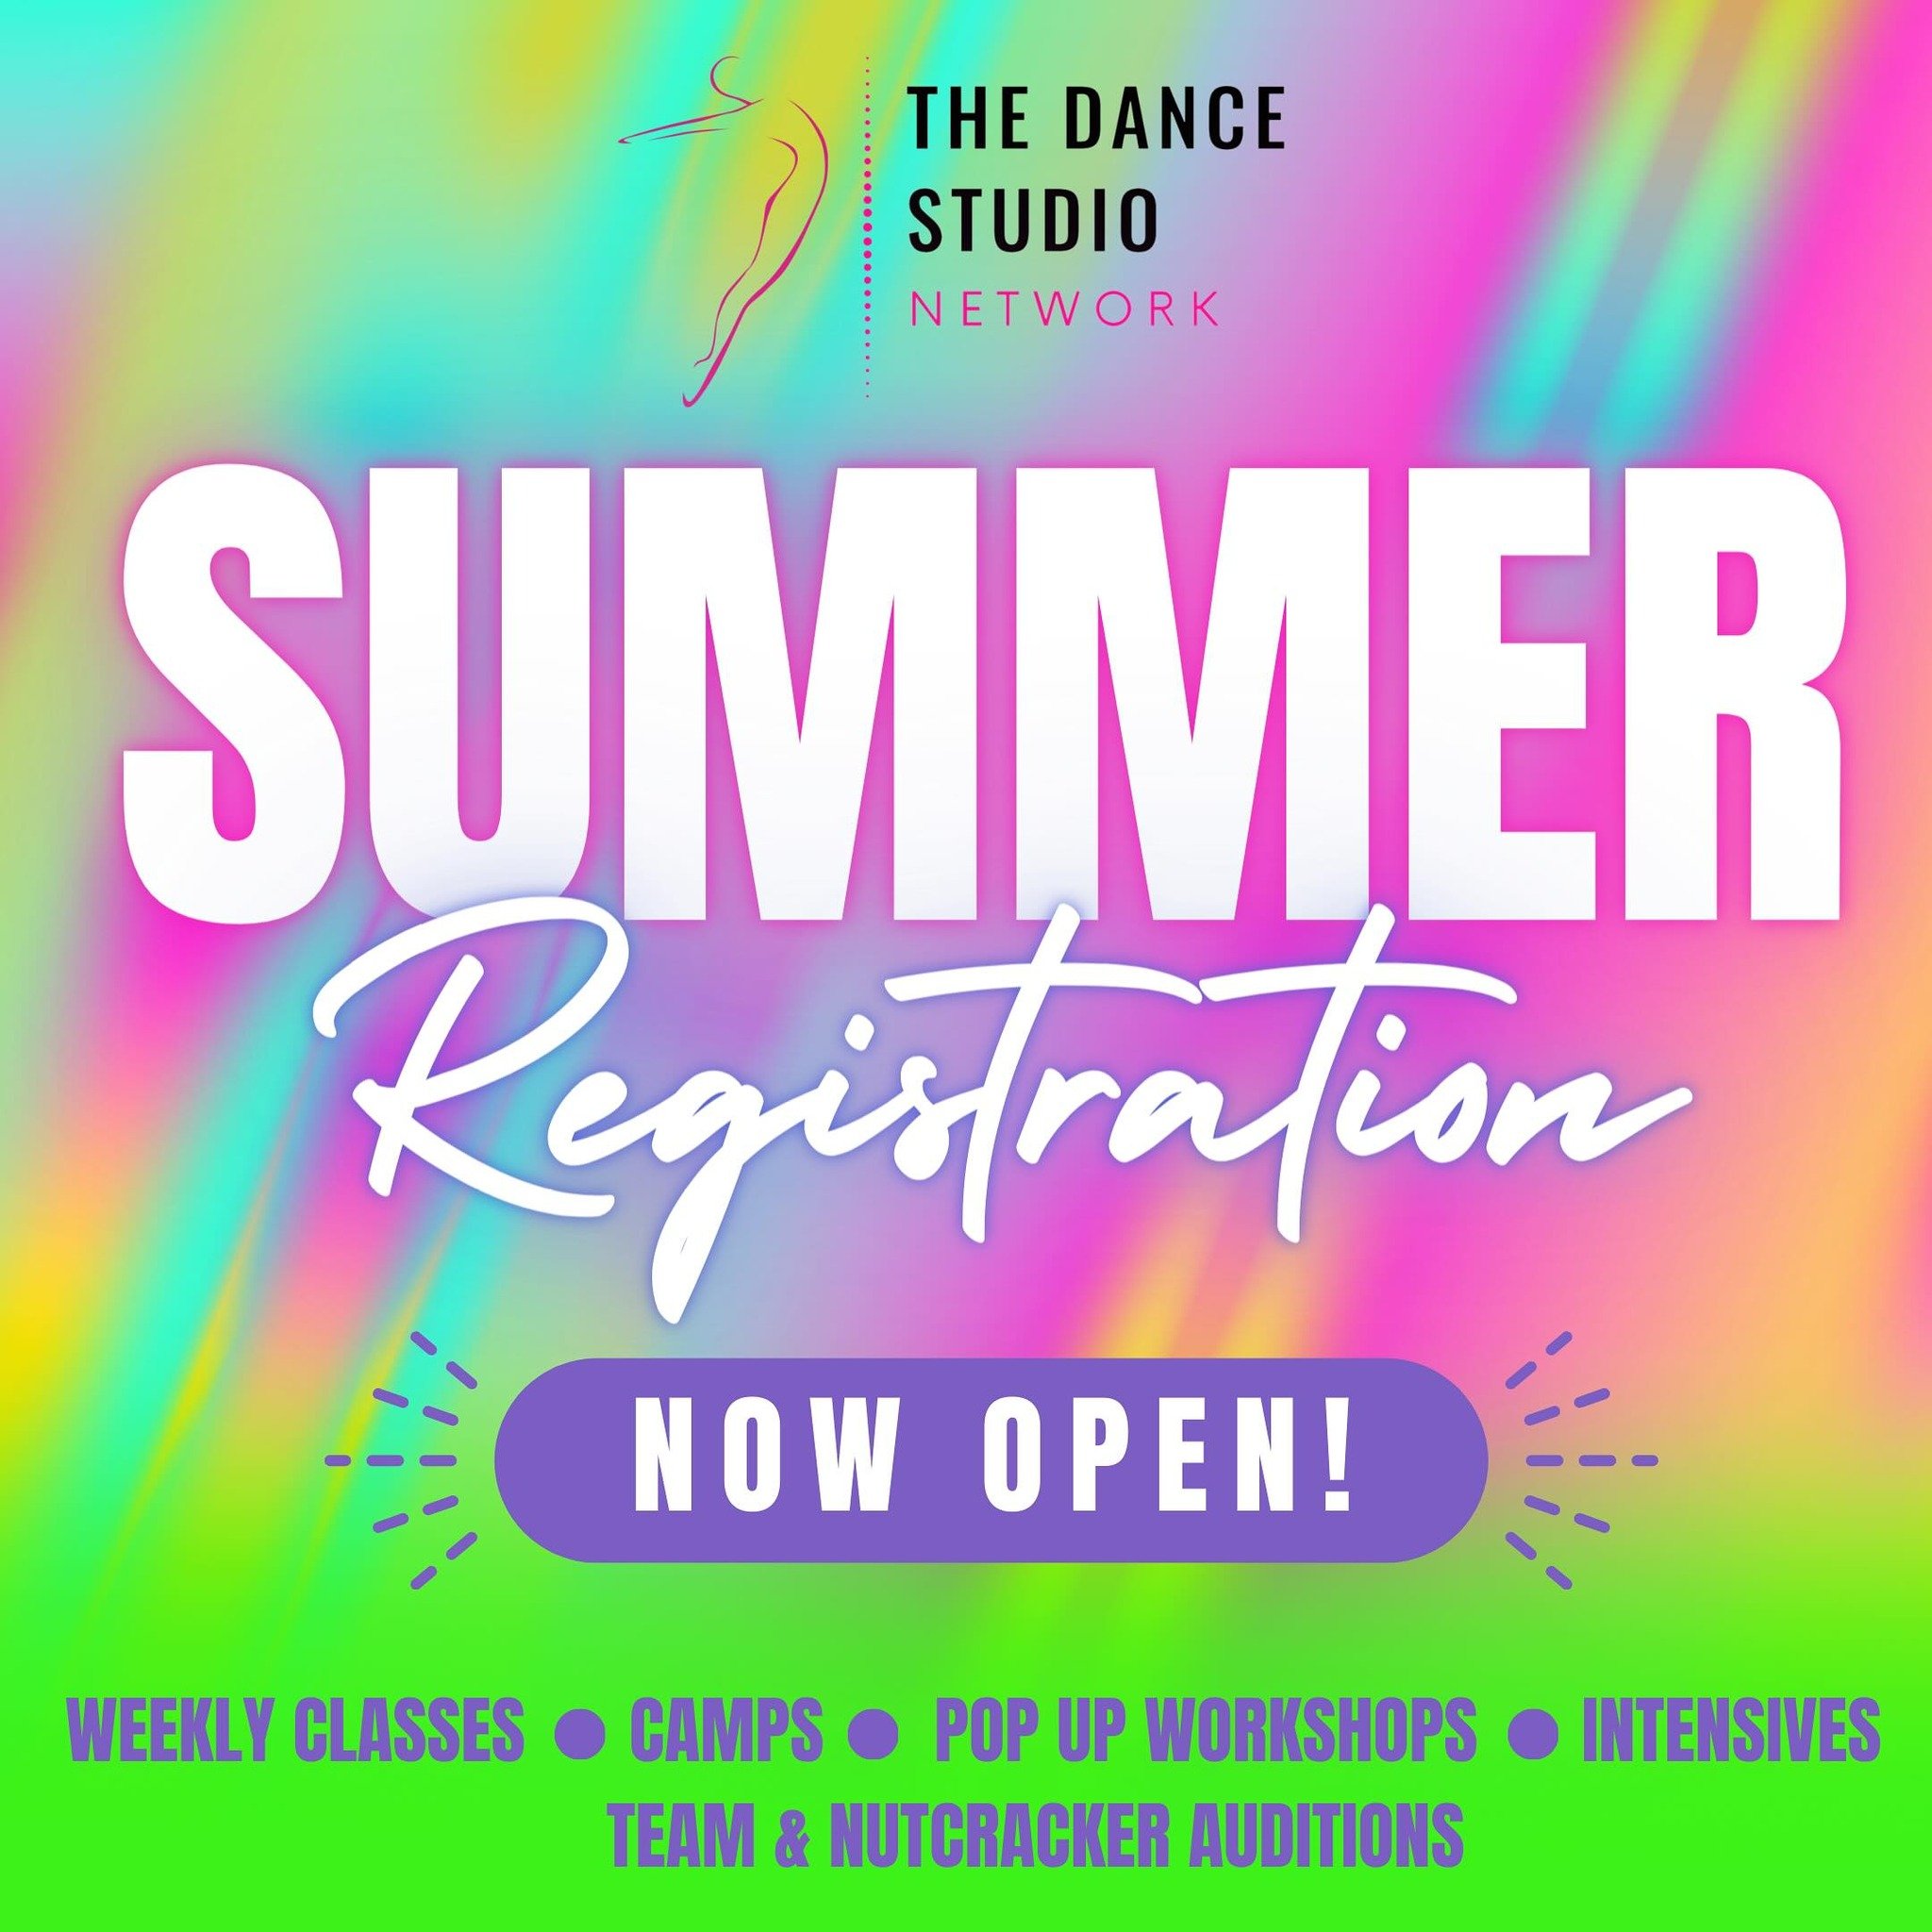 📣 SUMMER REGISTRATION IS NOW LIVE! 📣

Our Summer Session is an 8-week session from June 10-August 3 and includes&hellip;

☀️Weekly Classes
☀️Princess Camps
☀️Ballet Intensives
☀️Team Auditions
☀️The Nutcracker Auditions
☀️3 Summer Dance Series Work